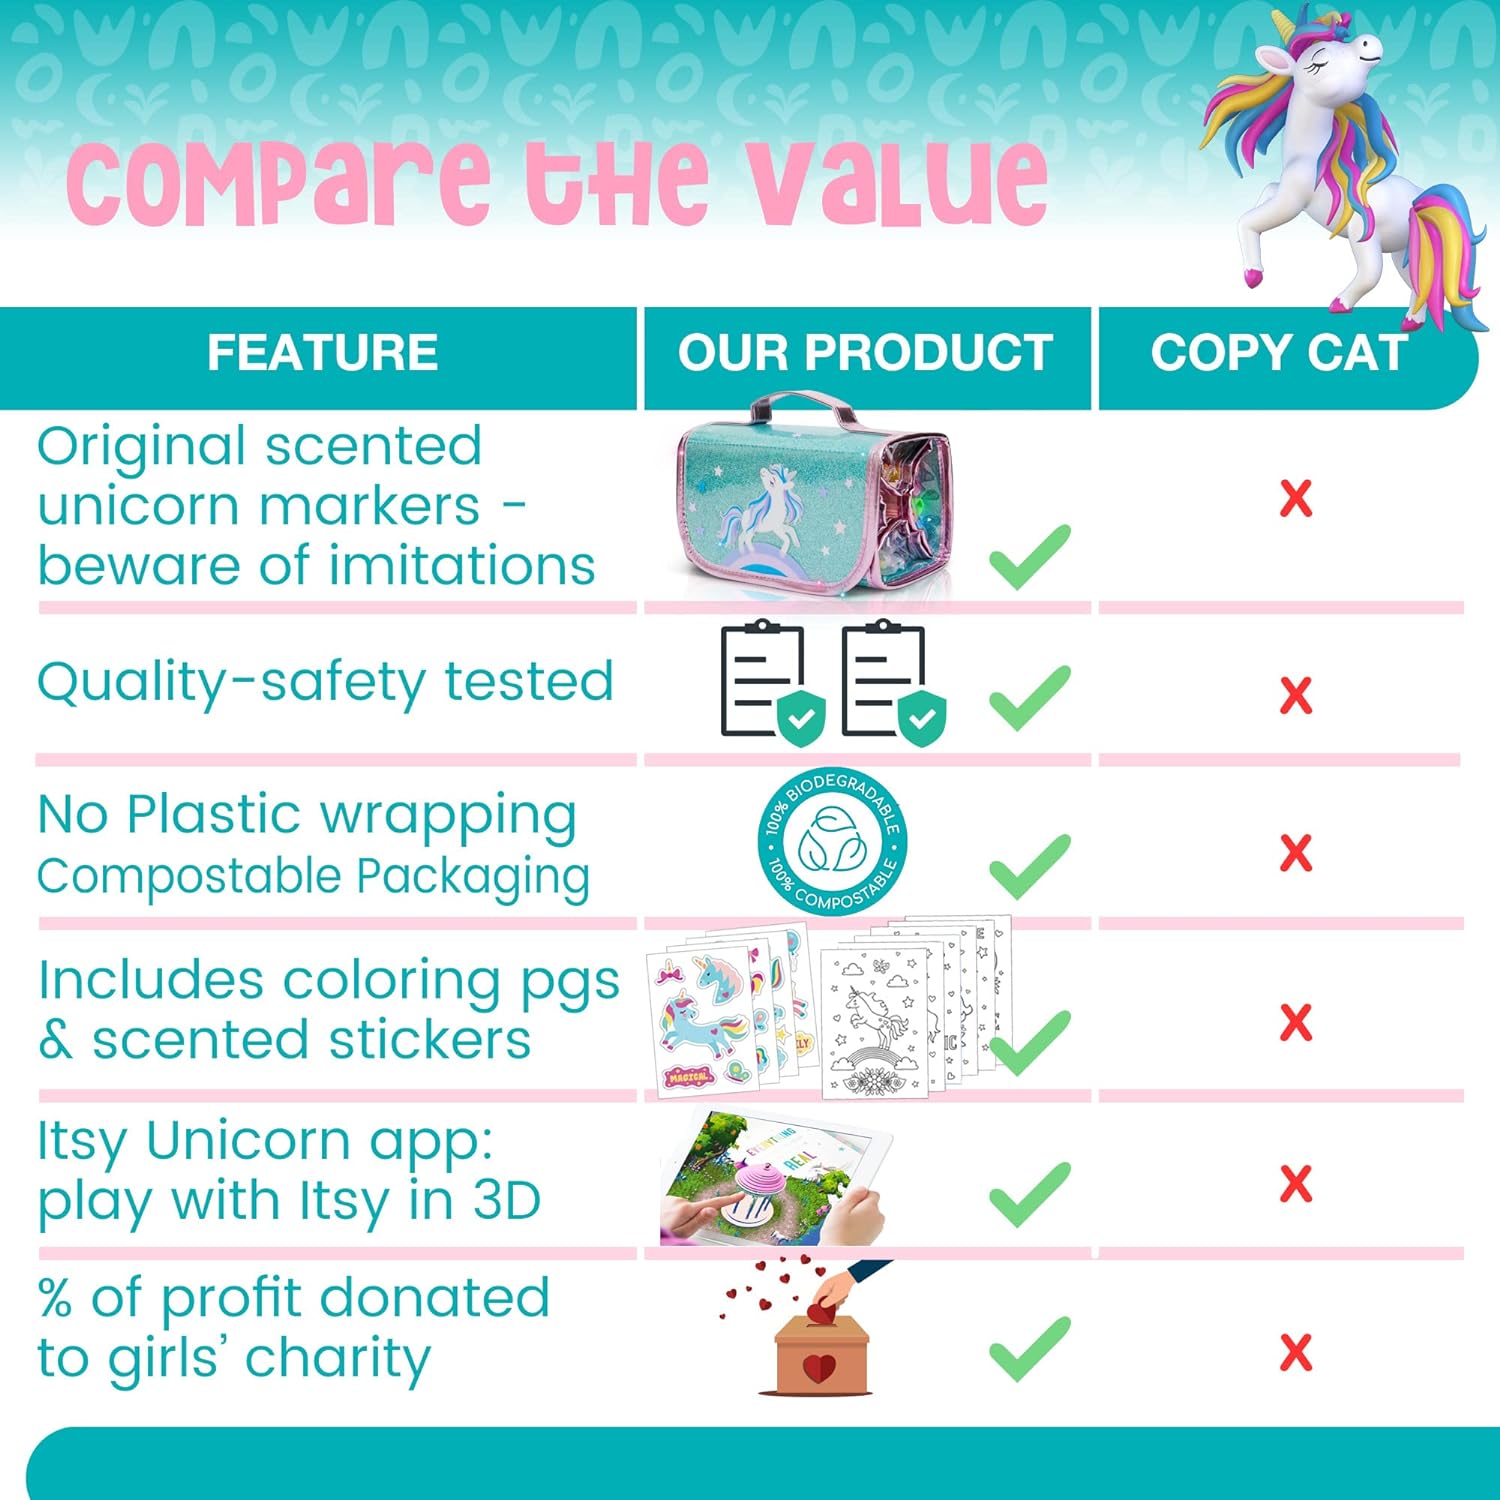 Amitié Lane Silly Scented Markers For Kids w/Augmented Reality App. Arts & Crafts Unicorn Gifts for Girls 6-8. Fun Kids Toys For Girls that includes Unicorn Markers, Stickers and Carrying Case.